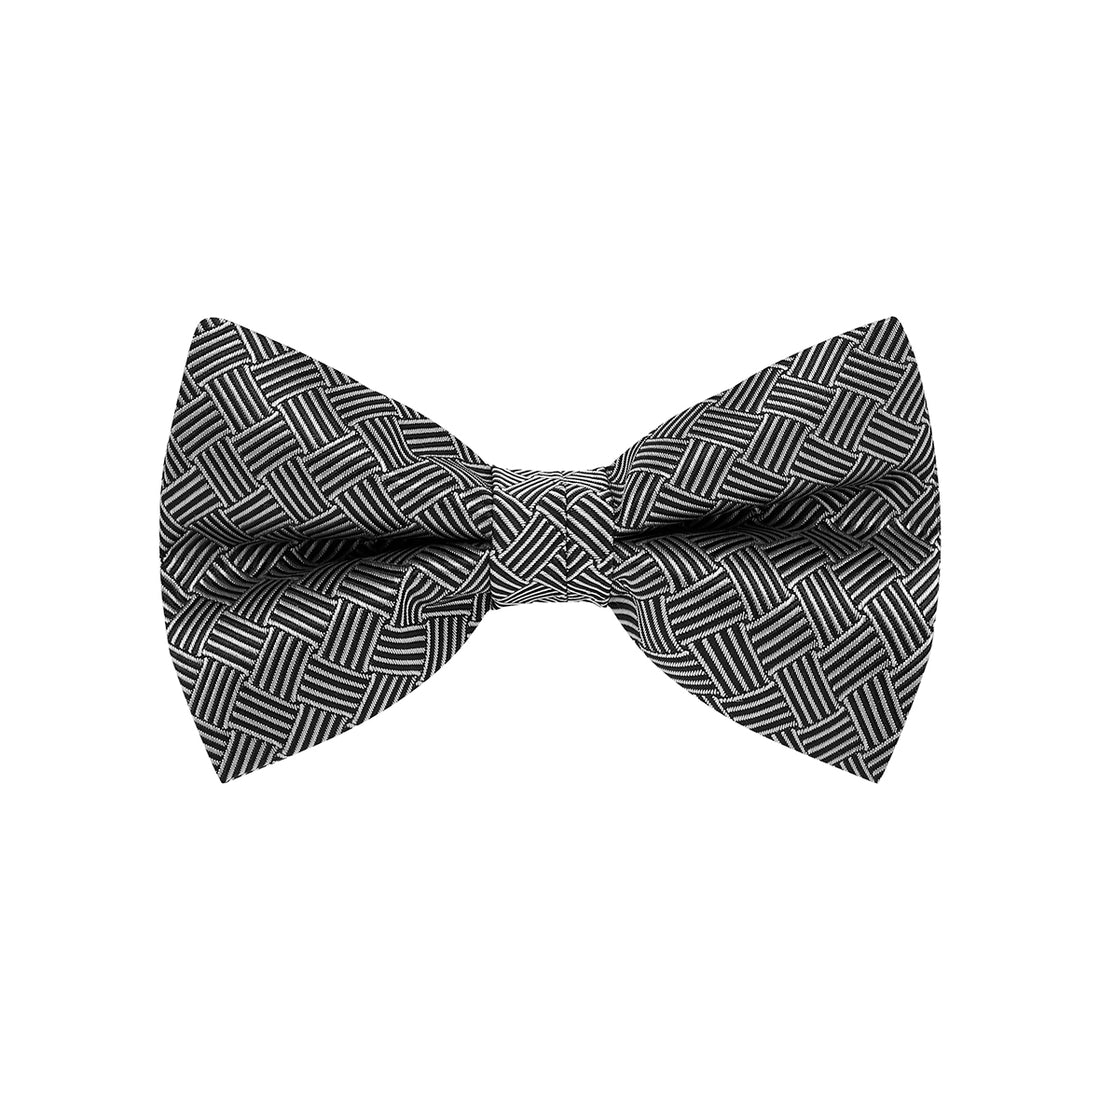 BOW TIE + POCKET SQUARE SET. Basket. Black/White. Supplied with matching pocket square.-Bow Ties-PEROZ Accessories